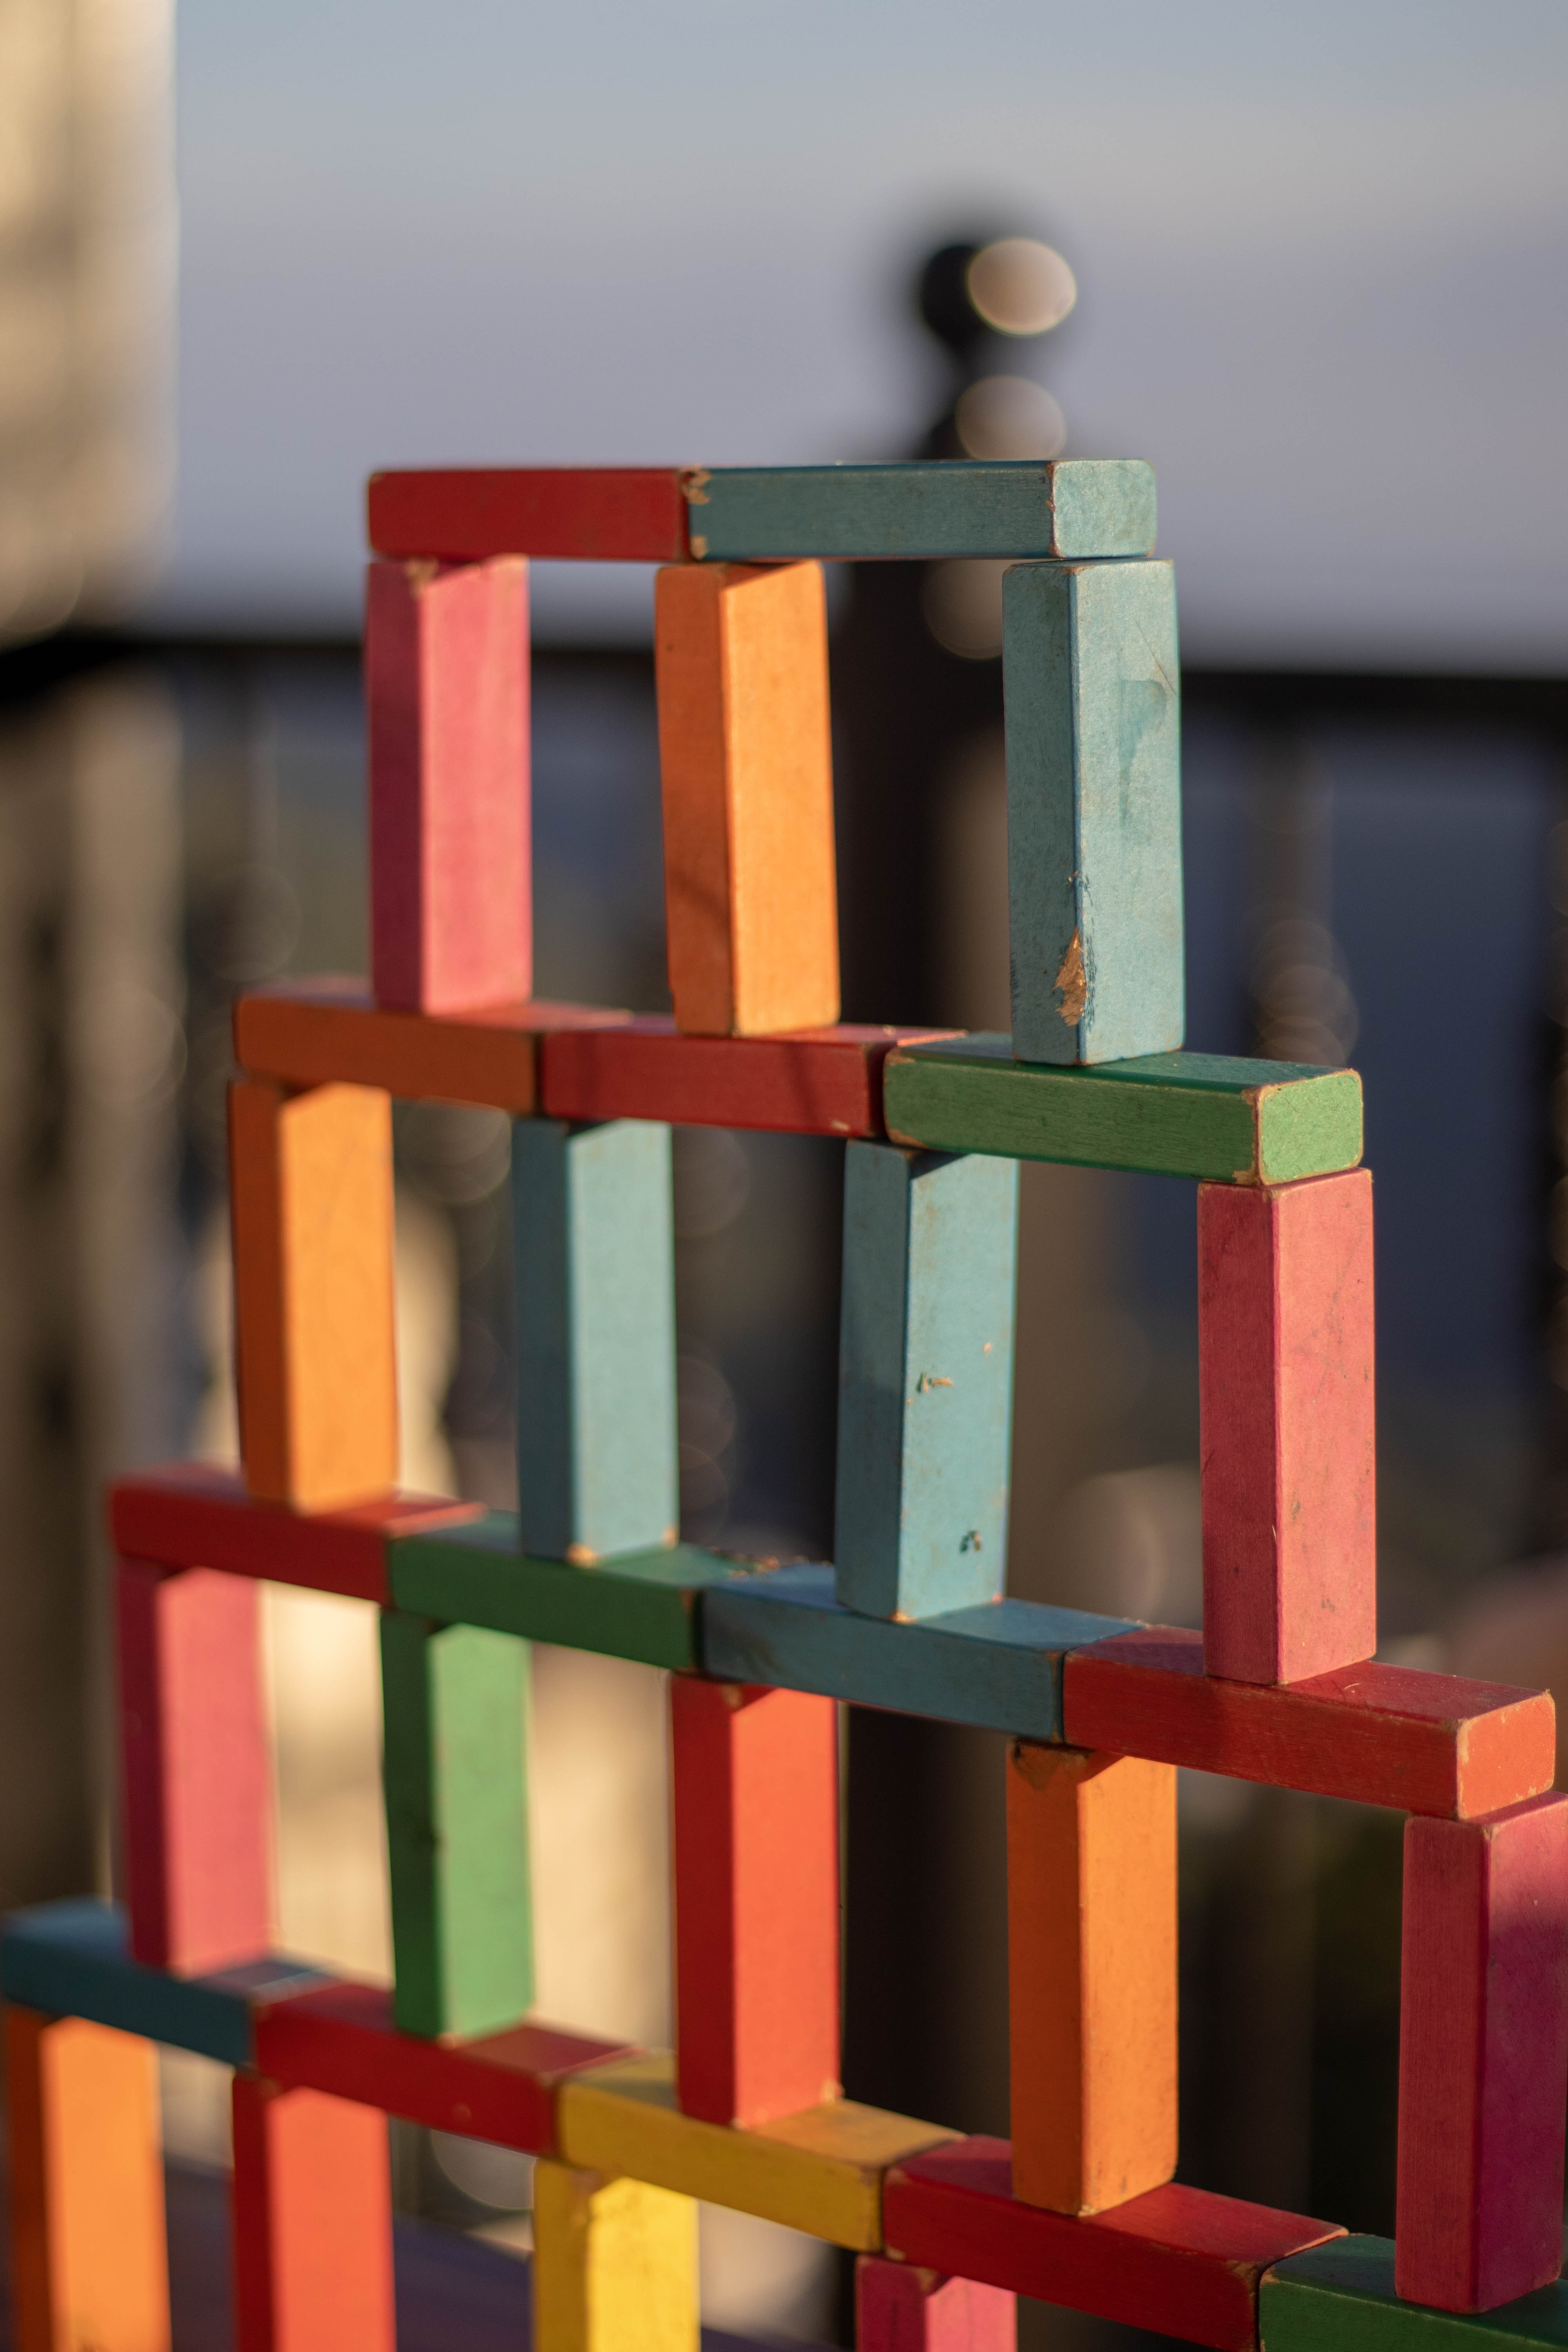 Colored wooden blocks on top of each other